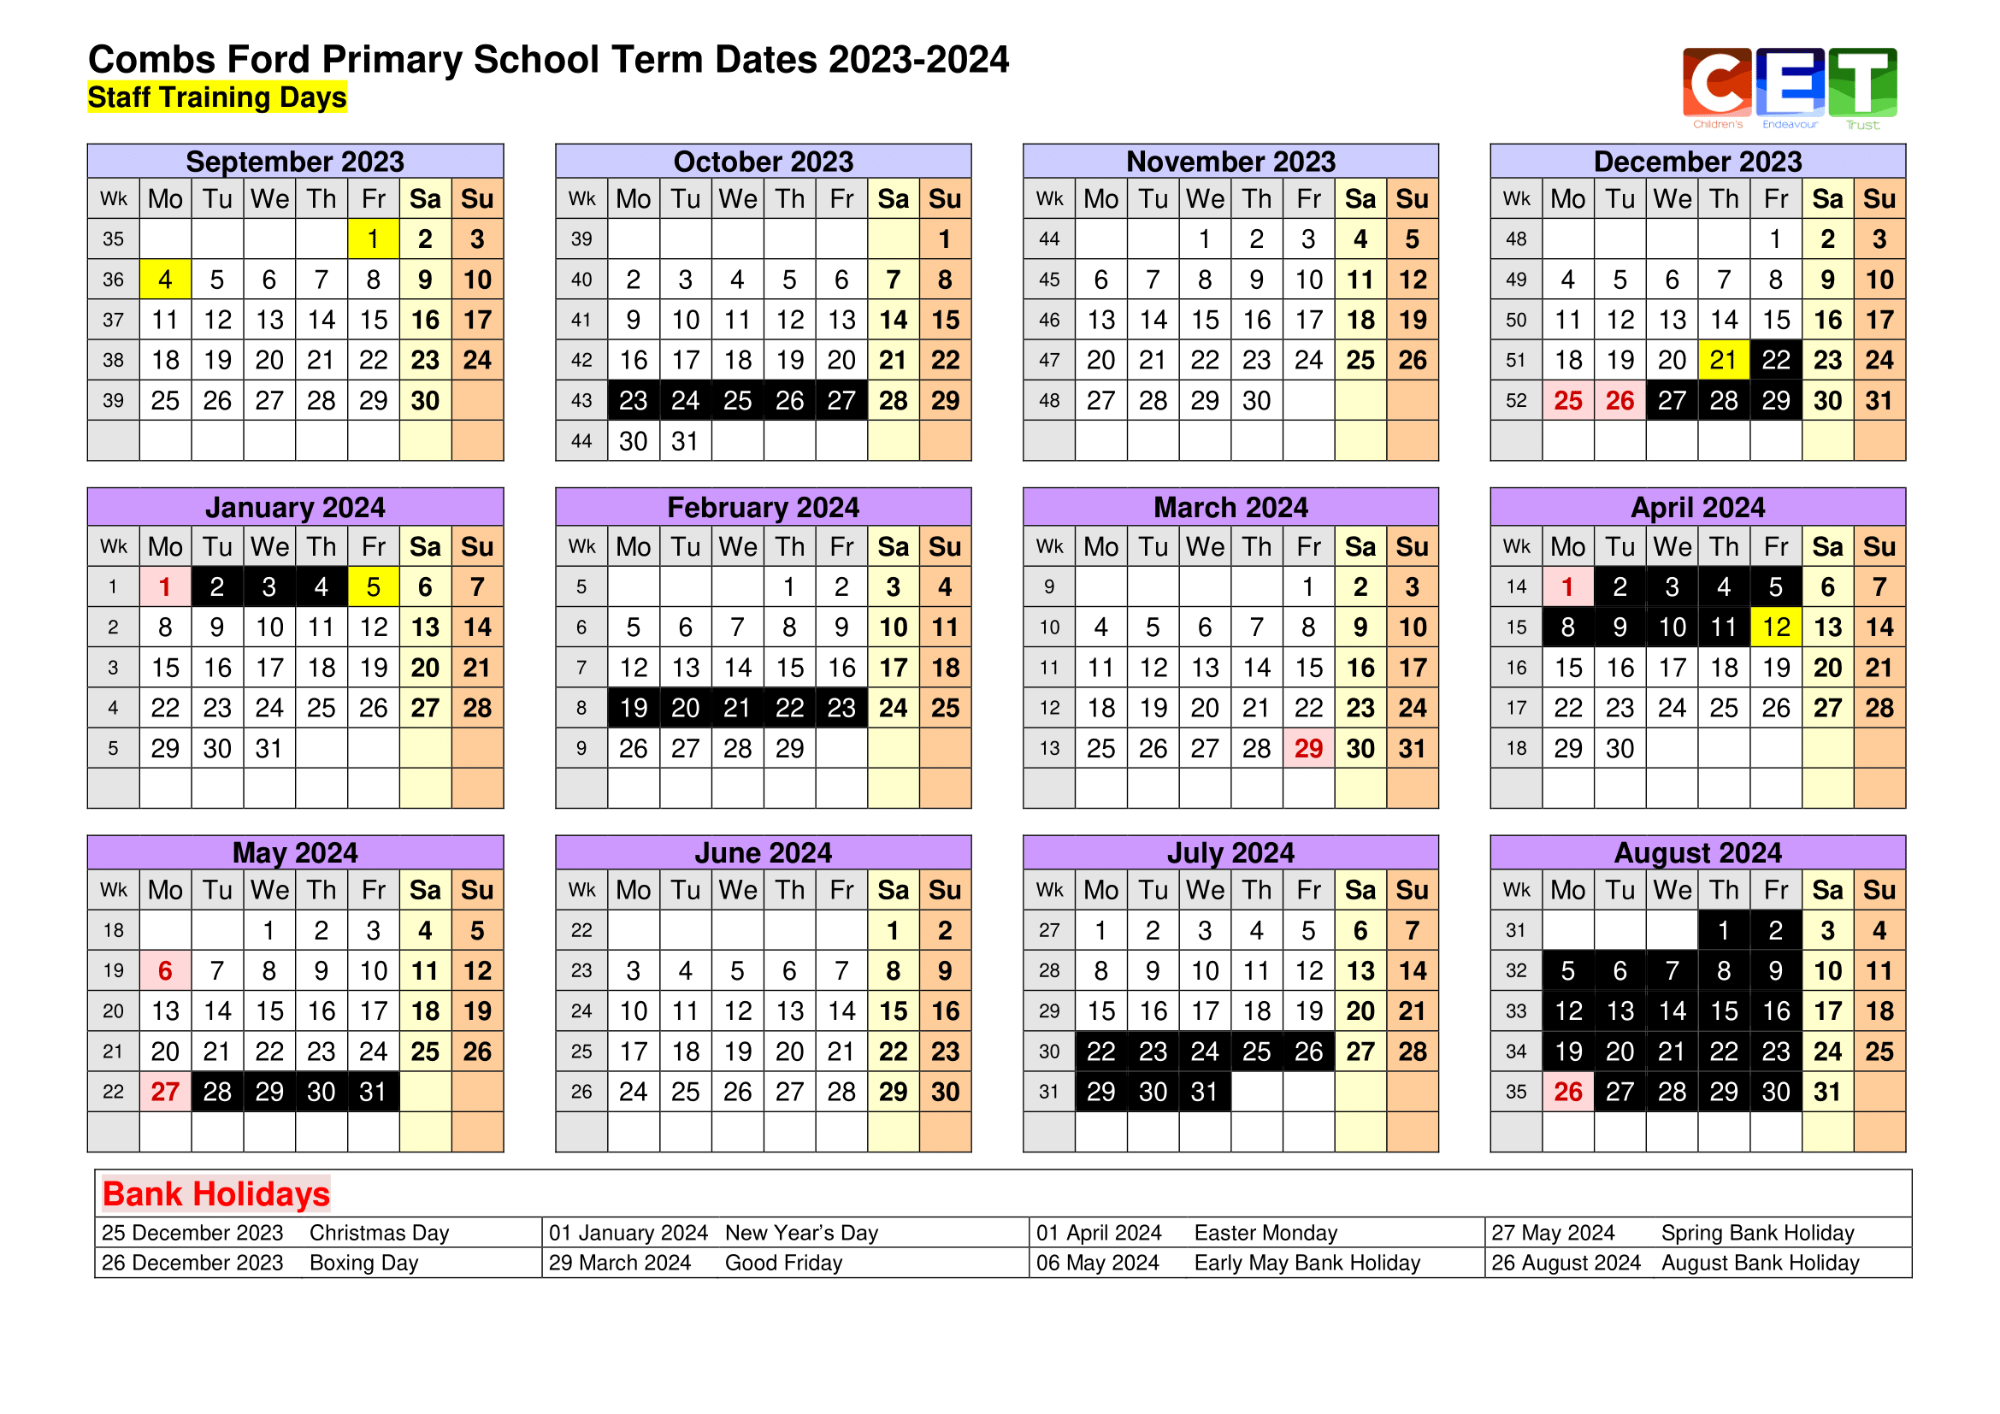 Image of Combs Ford Primary School's term dates for the academic year 2023-2024.